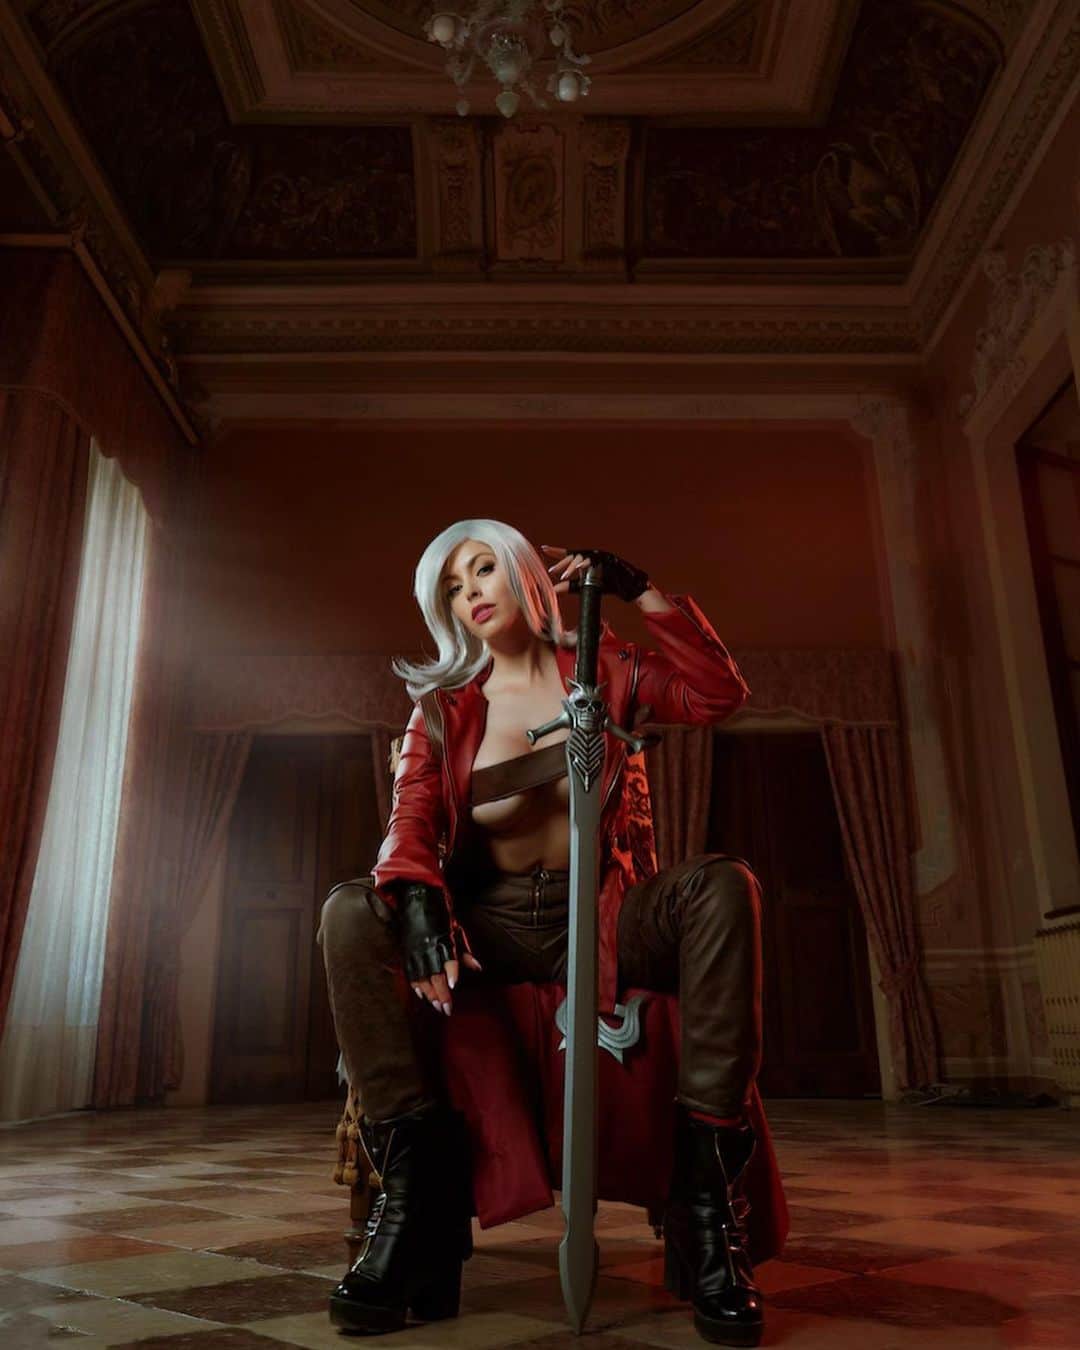 Nadya Antonのインスタグラム：「Devil may cry 3 🔥  Crazy to think that this game was released in 2005, for sure one on the coolest action- adventure sagas ⚔️ 📸 @carlos_adama  👗 @nadyasonika  #devilmaycry #dante #capcom #genderbender」